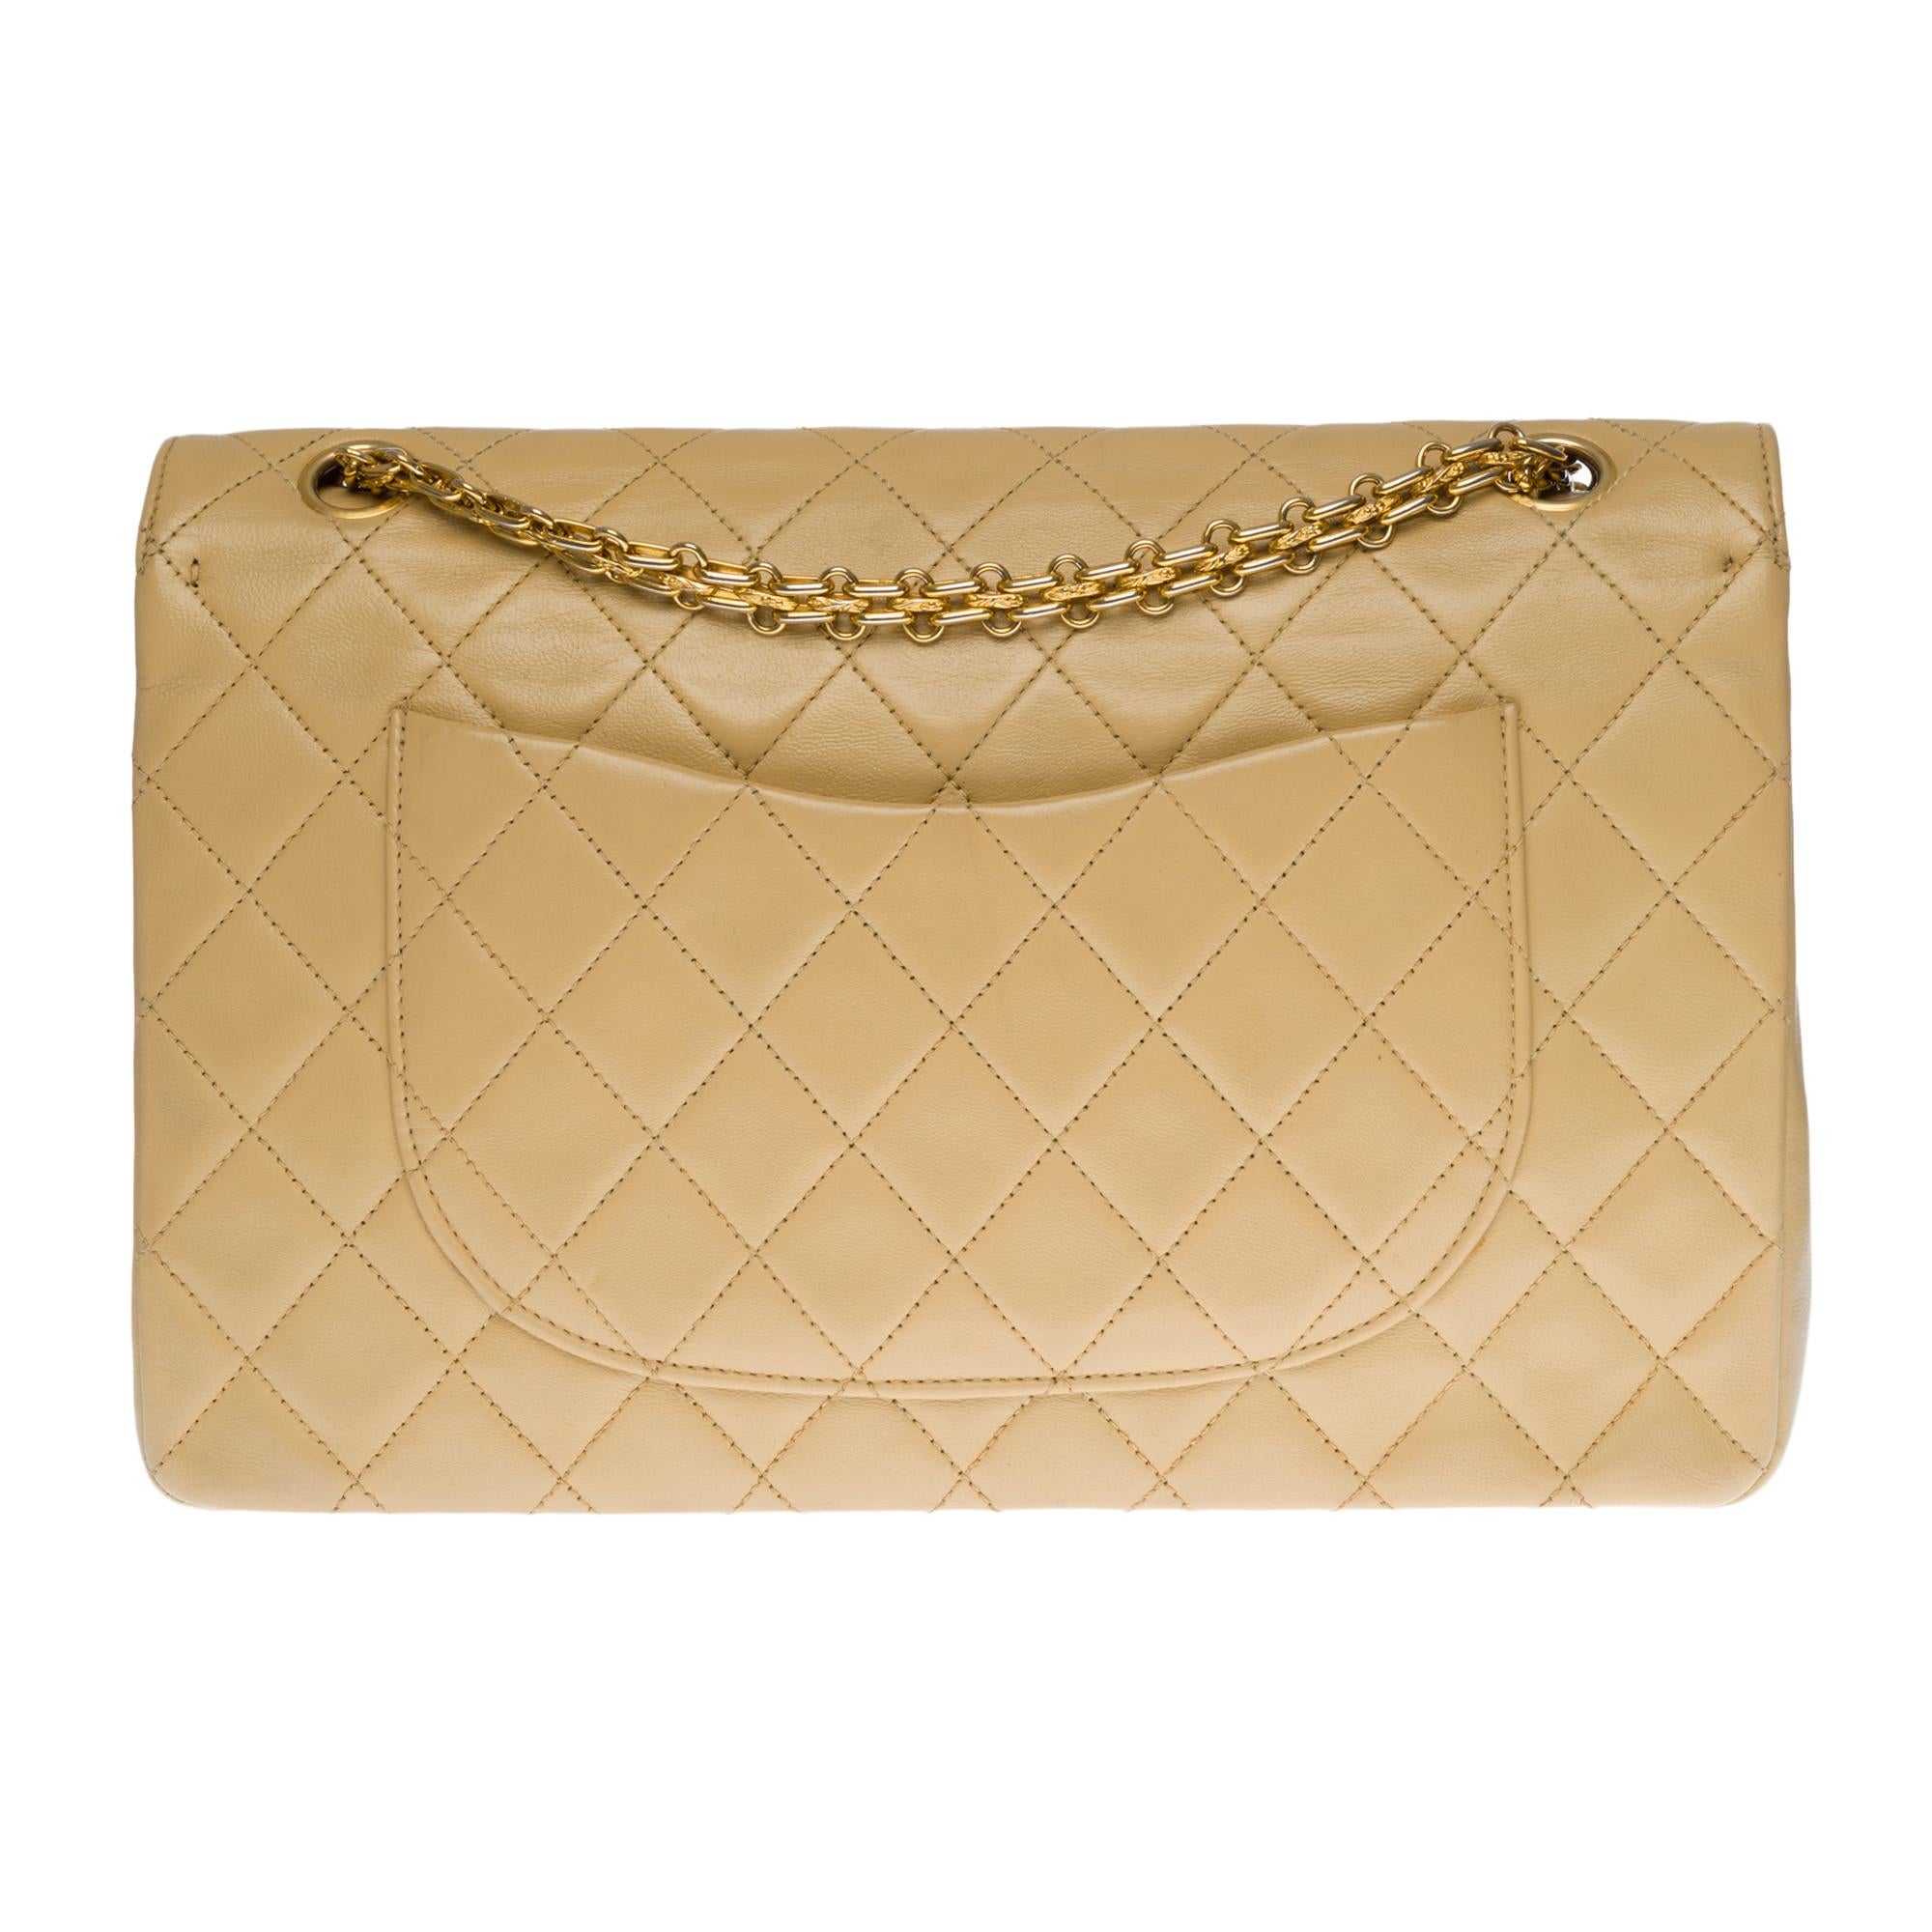 Beautiful Chanel Timeless/Classique Coco handbag with double flap in beige quilted lambskin leather, gold metal hardware, a Mademoiselle chain handle in gold metal allowing a hand or shoulder support.

Closure with gold metal flap.
A patch pocket on